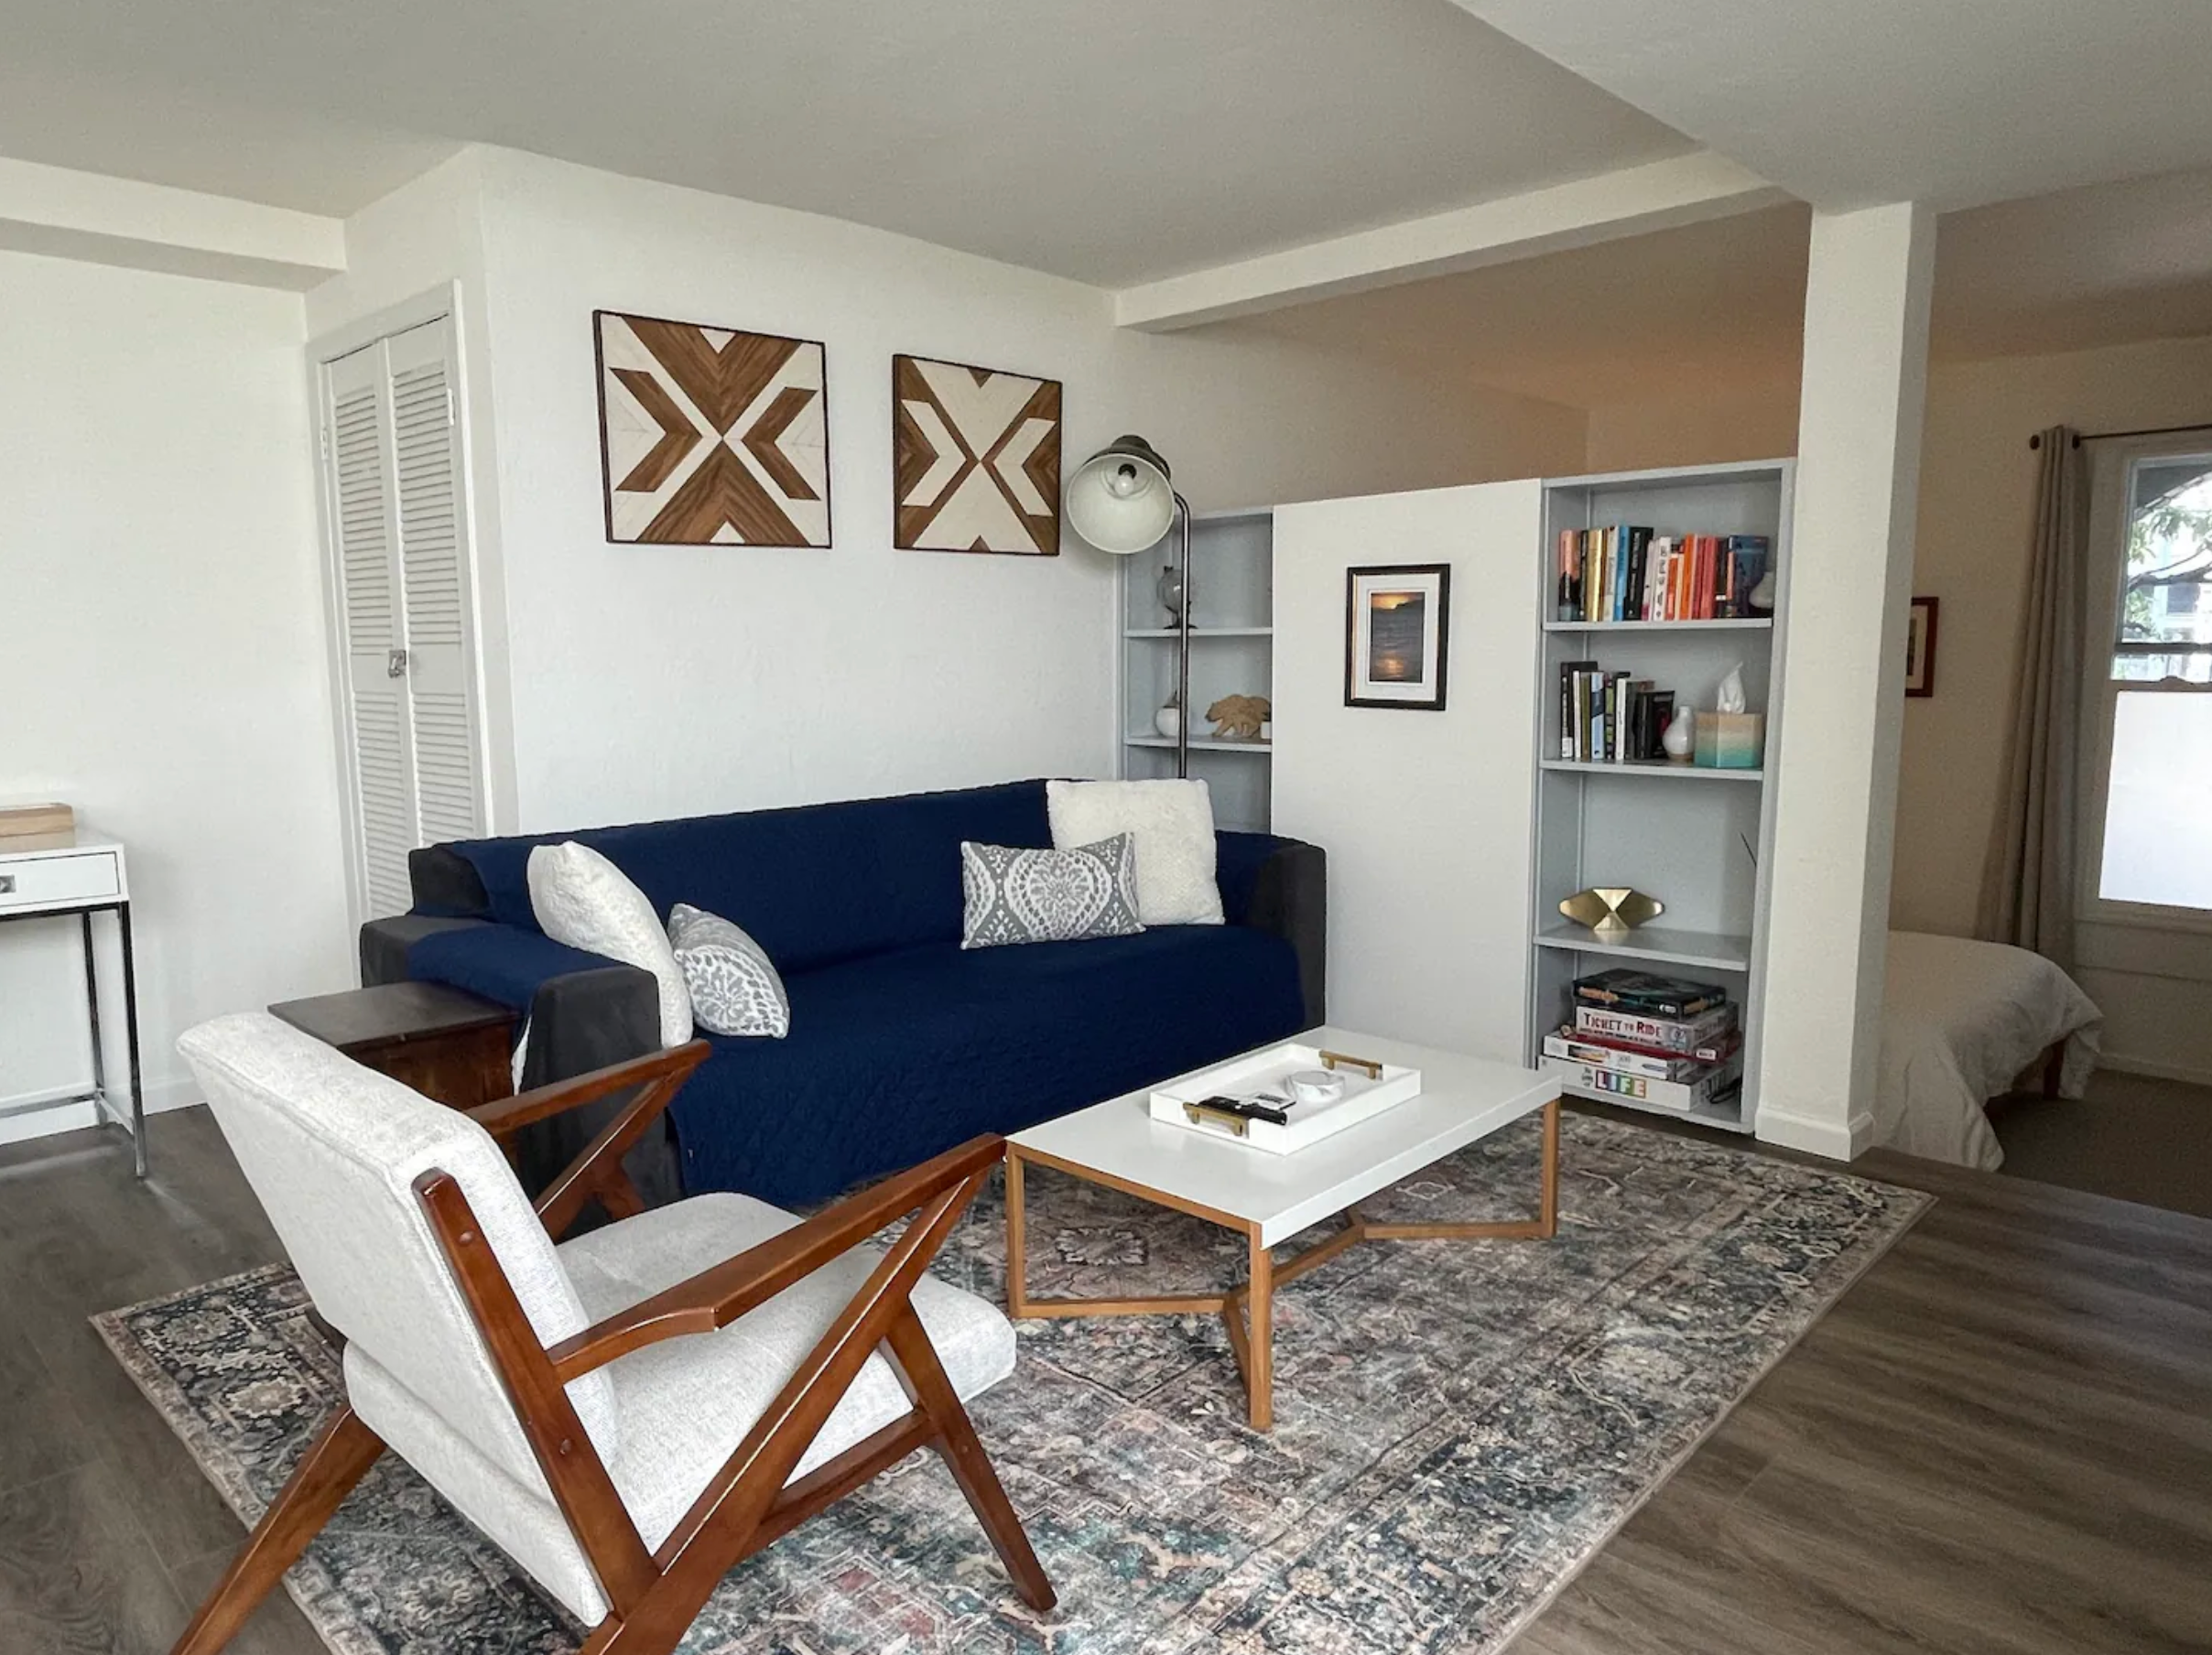 <p><strong>Bed & bath:</strong> Studio, 1 bath<br> <strong>Top amenities:</strong> Central location, dedicated workspace, private patio</p> <p>This quaint guest house just one block from Dolores Park couldn’t be more ideal for a solo traveler or a couple on the go. The space has everything one person (or duo) needs, and nothing they don’t. Guests have access to the 900-square-foot first floor, which contains a fully equipped kitchen, a queen-size pull-out sofa to fit extra guests (the space technically sleeps up to four, though it's certainly more comfortable for one or two), a dedicated workspace with a fabulous Eames chair, TV streaming services, and more. Simple yet chic, the open floor plan is ideal for those who don’t need too much privacy.</p> $217, Airbnb (starting price). <a href="https://www.airbnb.com/rooms/47705504">Get it now!</a><p>Sign up to receive the latest news, expert tips, and inspiration on all things travel</p><a href="https://www.cntraveler.com/newsletter/the-daily?sourceCode=msnsend">Inspire Me</a>